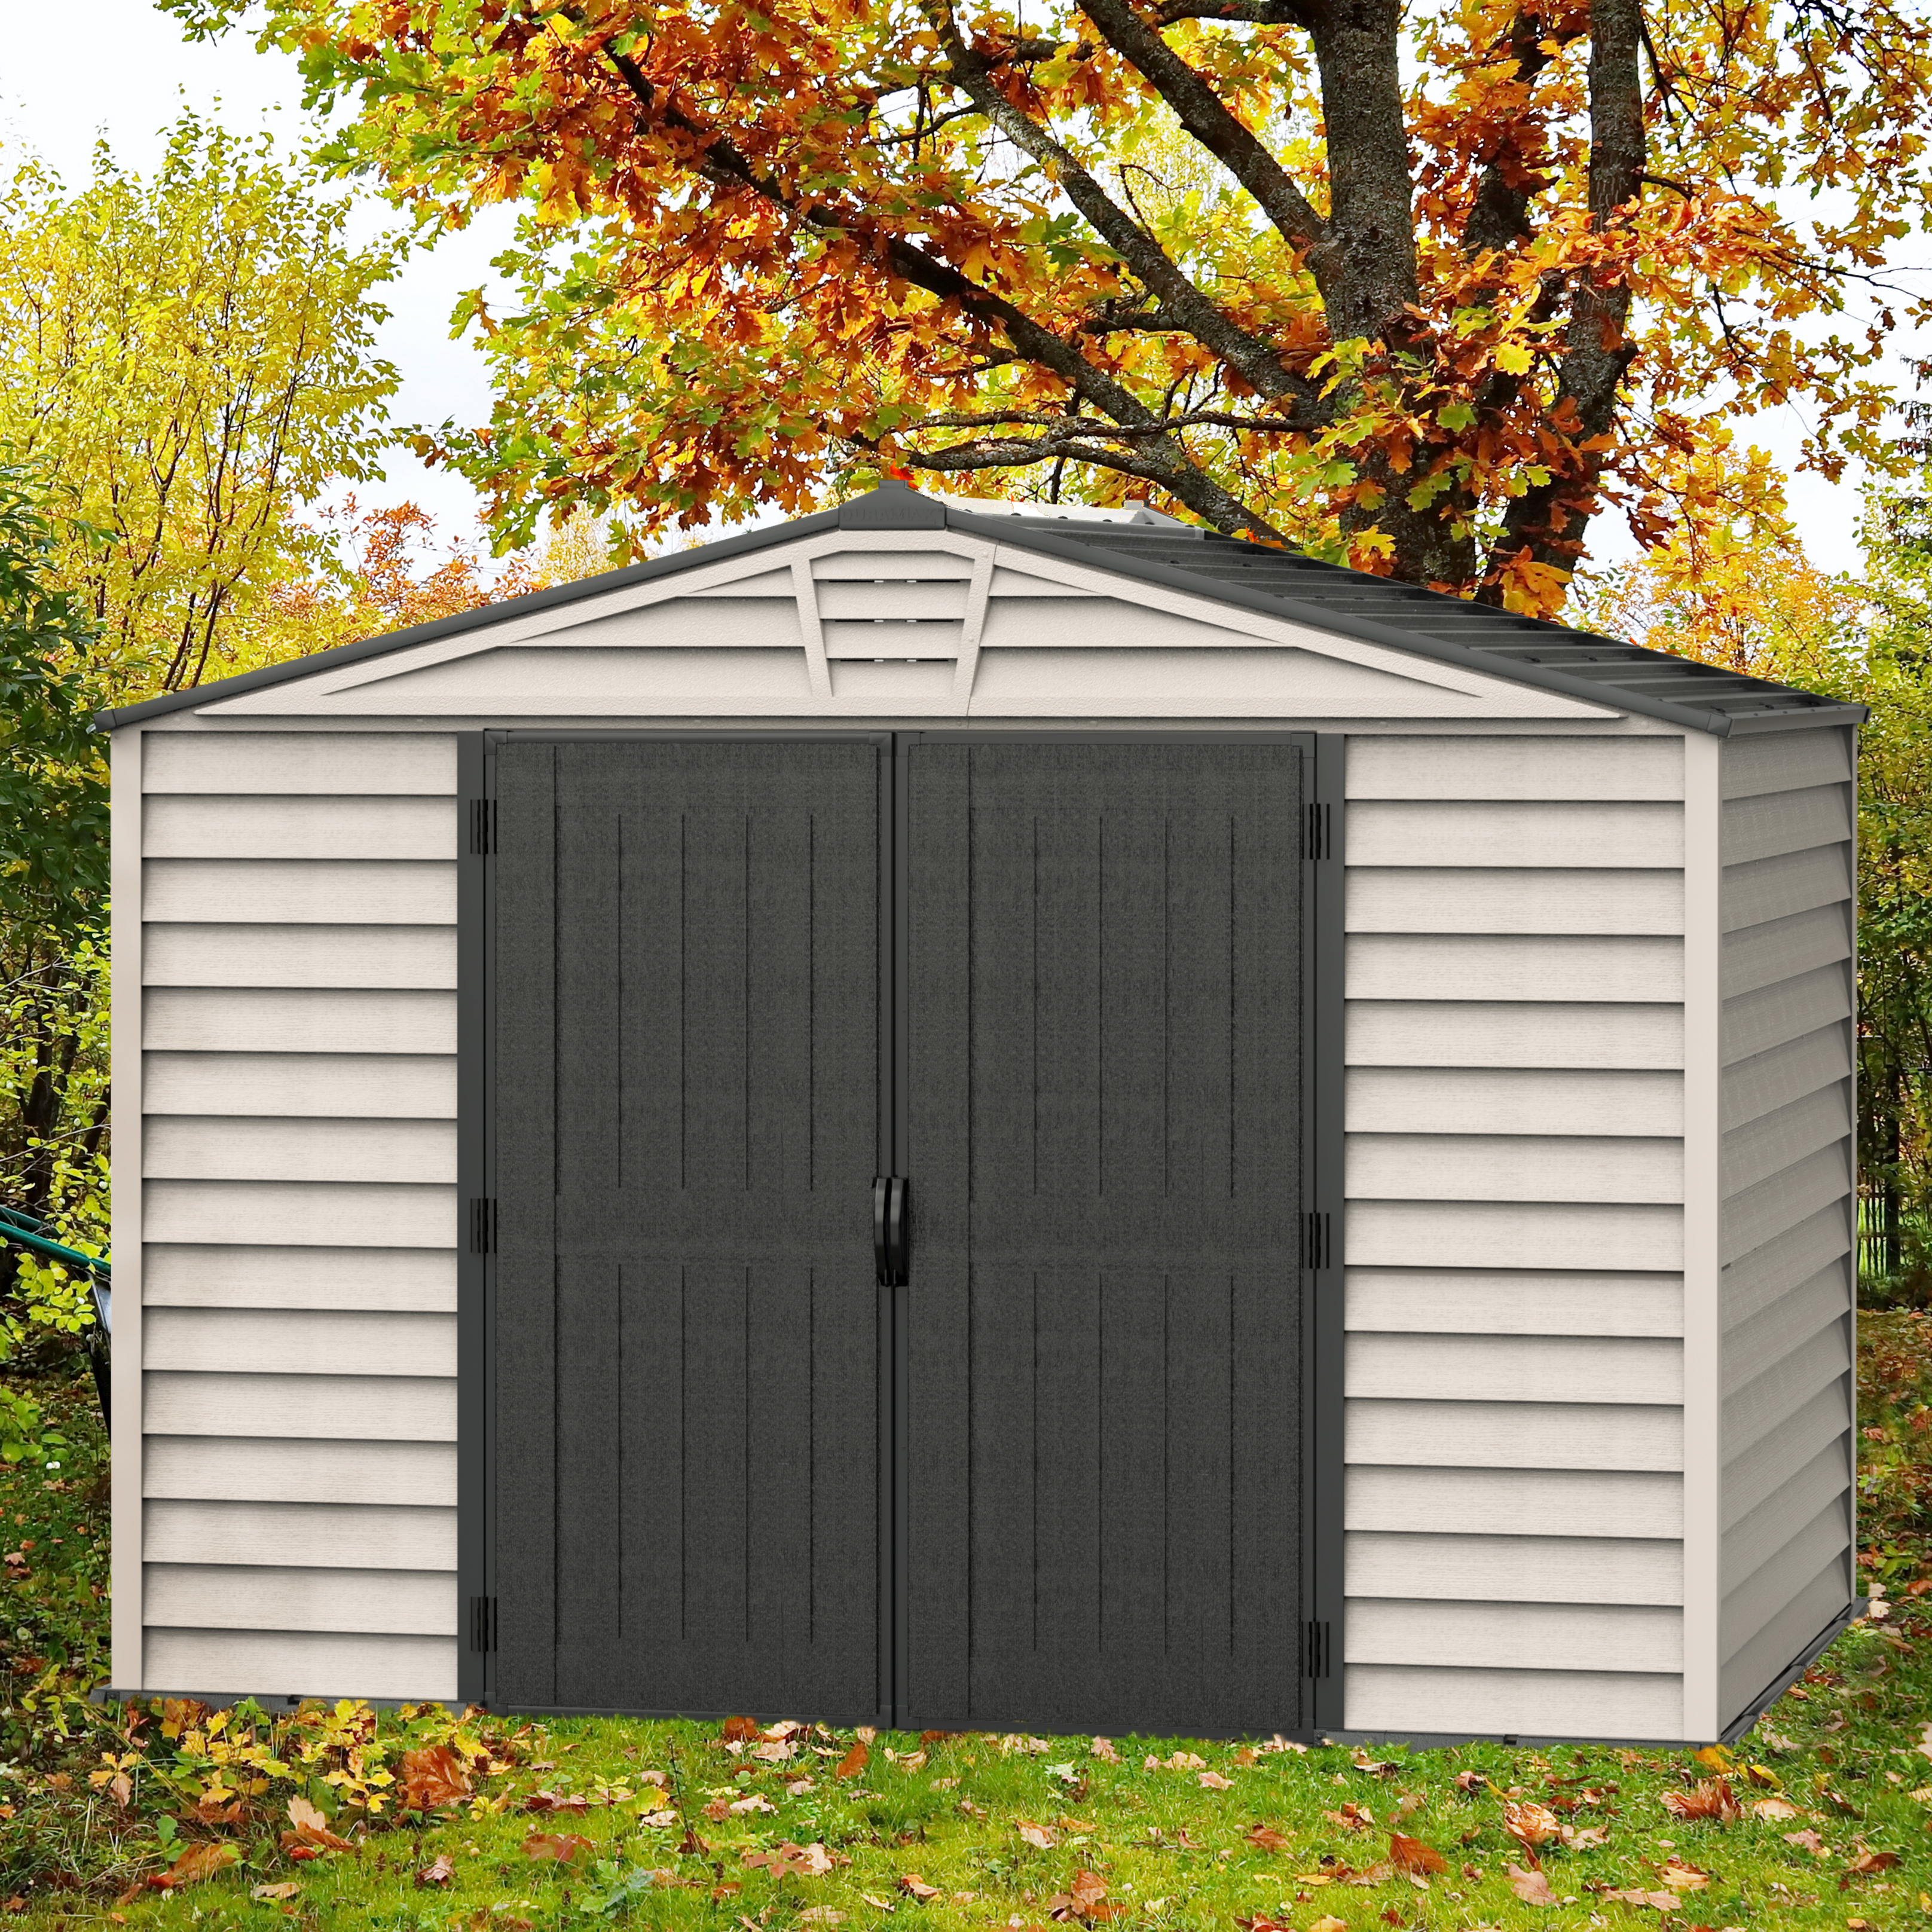 DuraMax StoreMax Plus 10.5x8 Ft with Molded Floor Vinyl Storage Shed